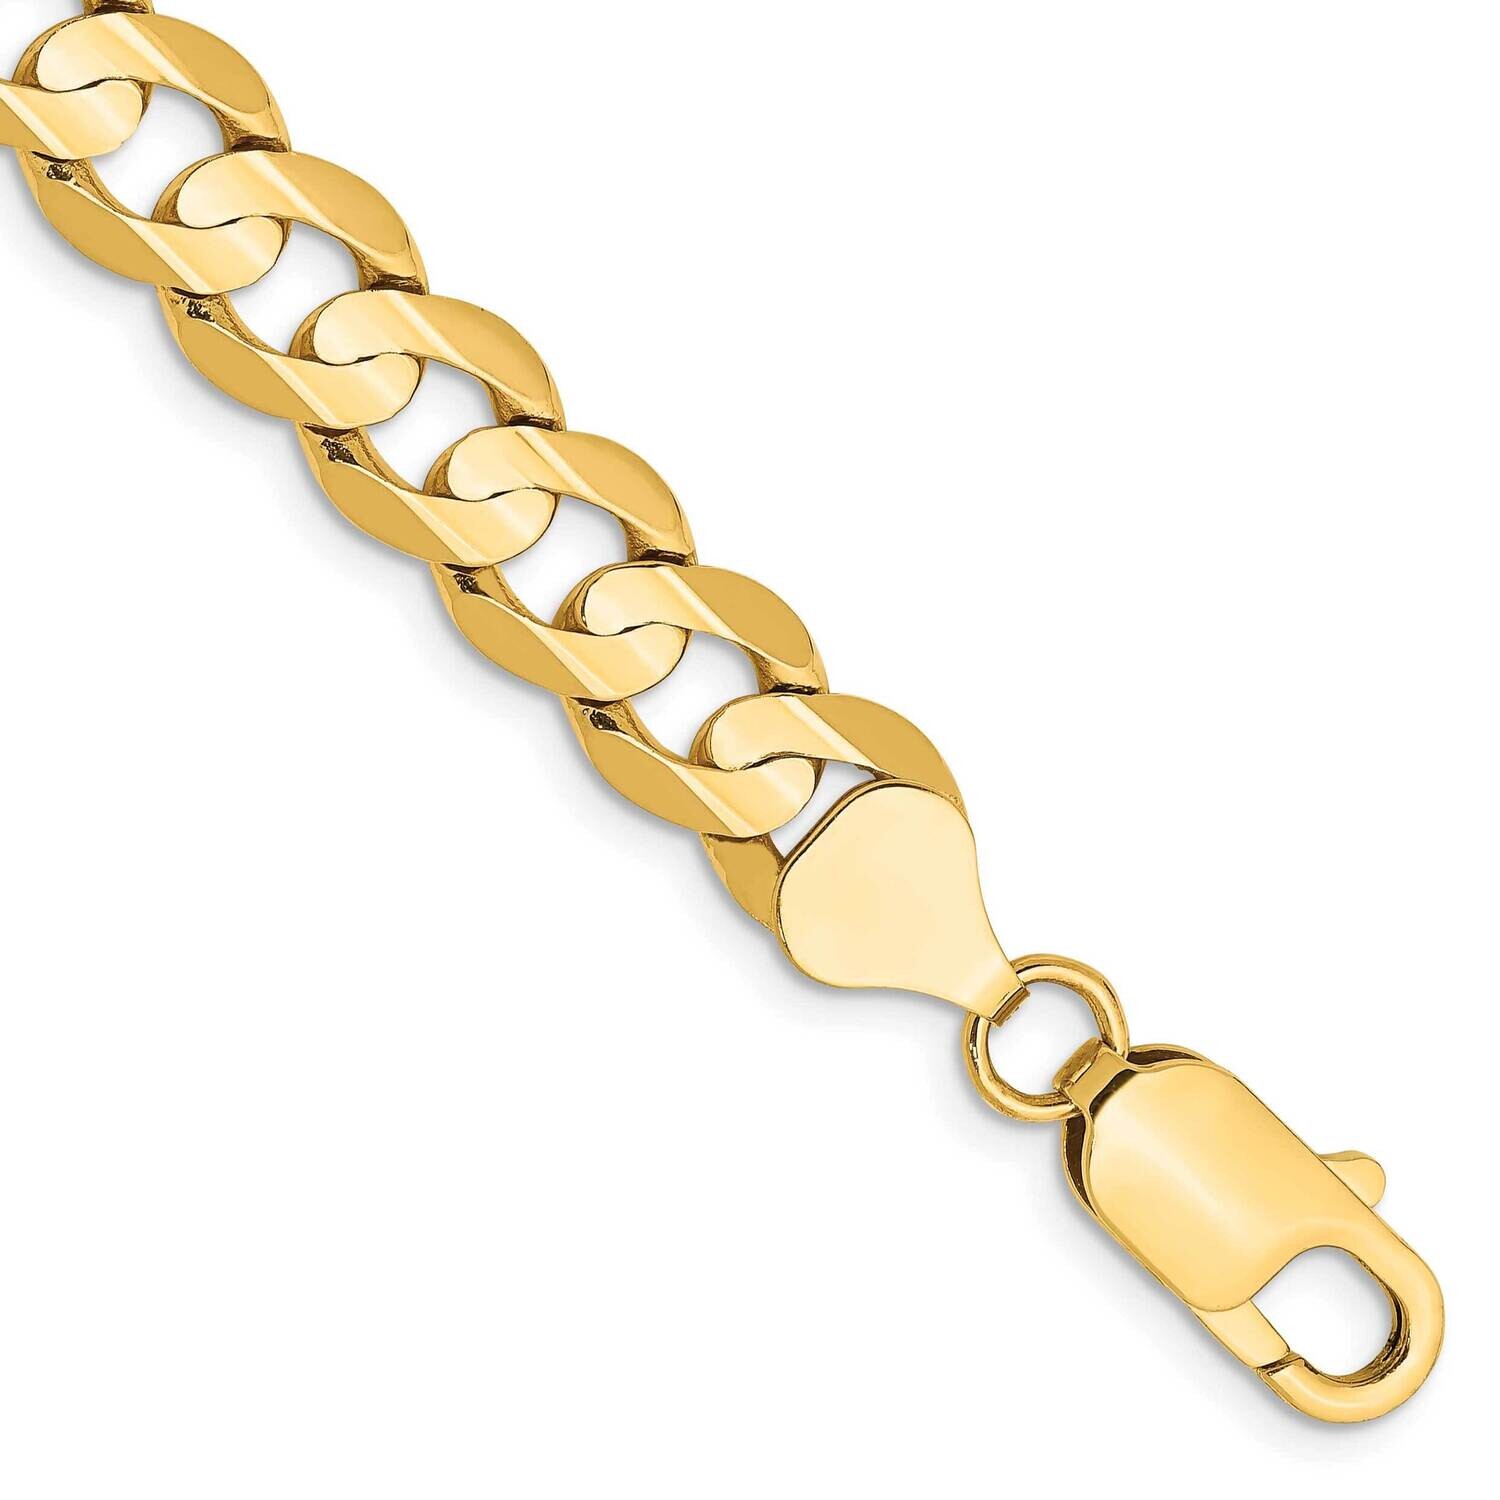 7.5mm Open Concave Curb Chain 7 Inch 10k Gold 10LCR200-7